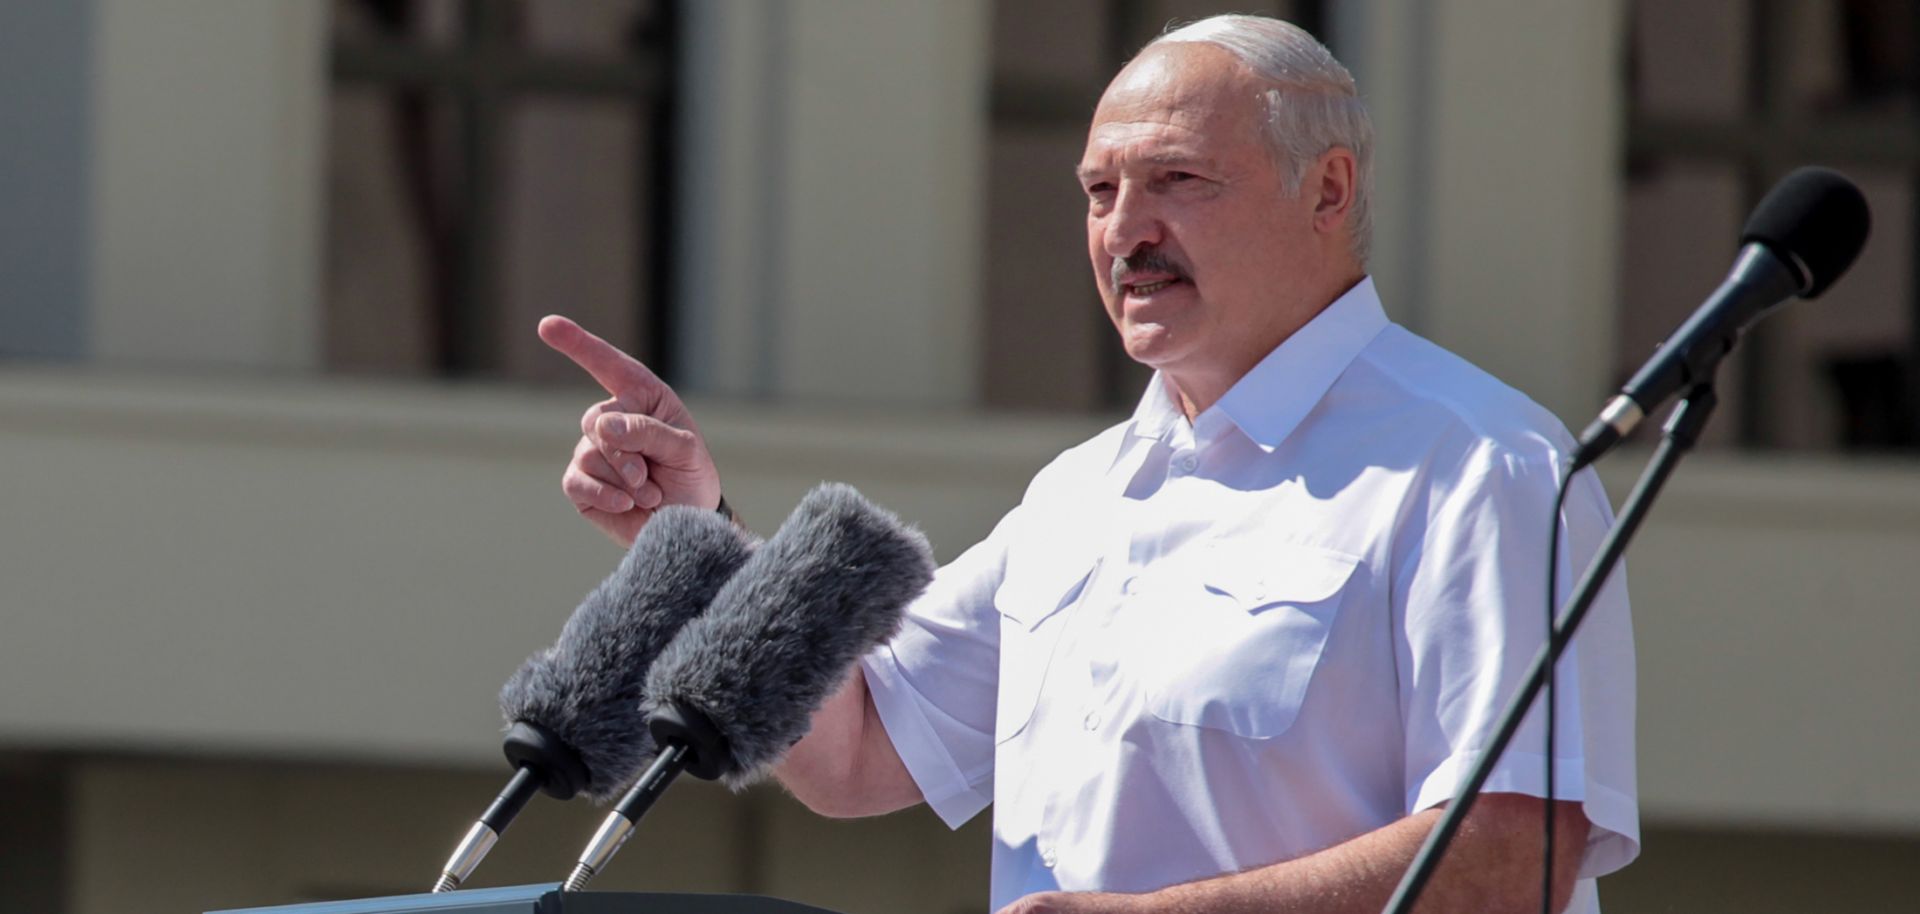 Belarussian President Aleksandr Lukashenko delivers a speech Aug. 16, 2020, during a rally held to support him in central Minsk, Belarus.